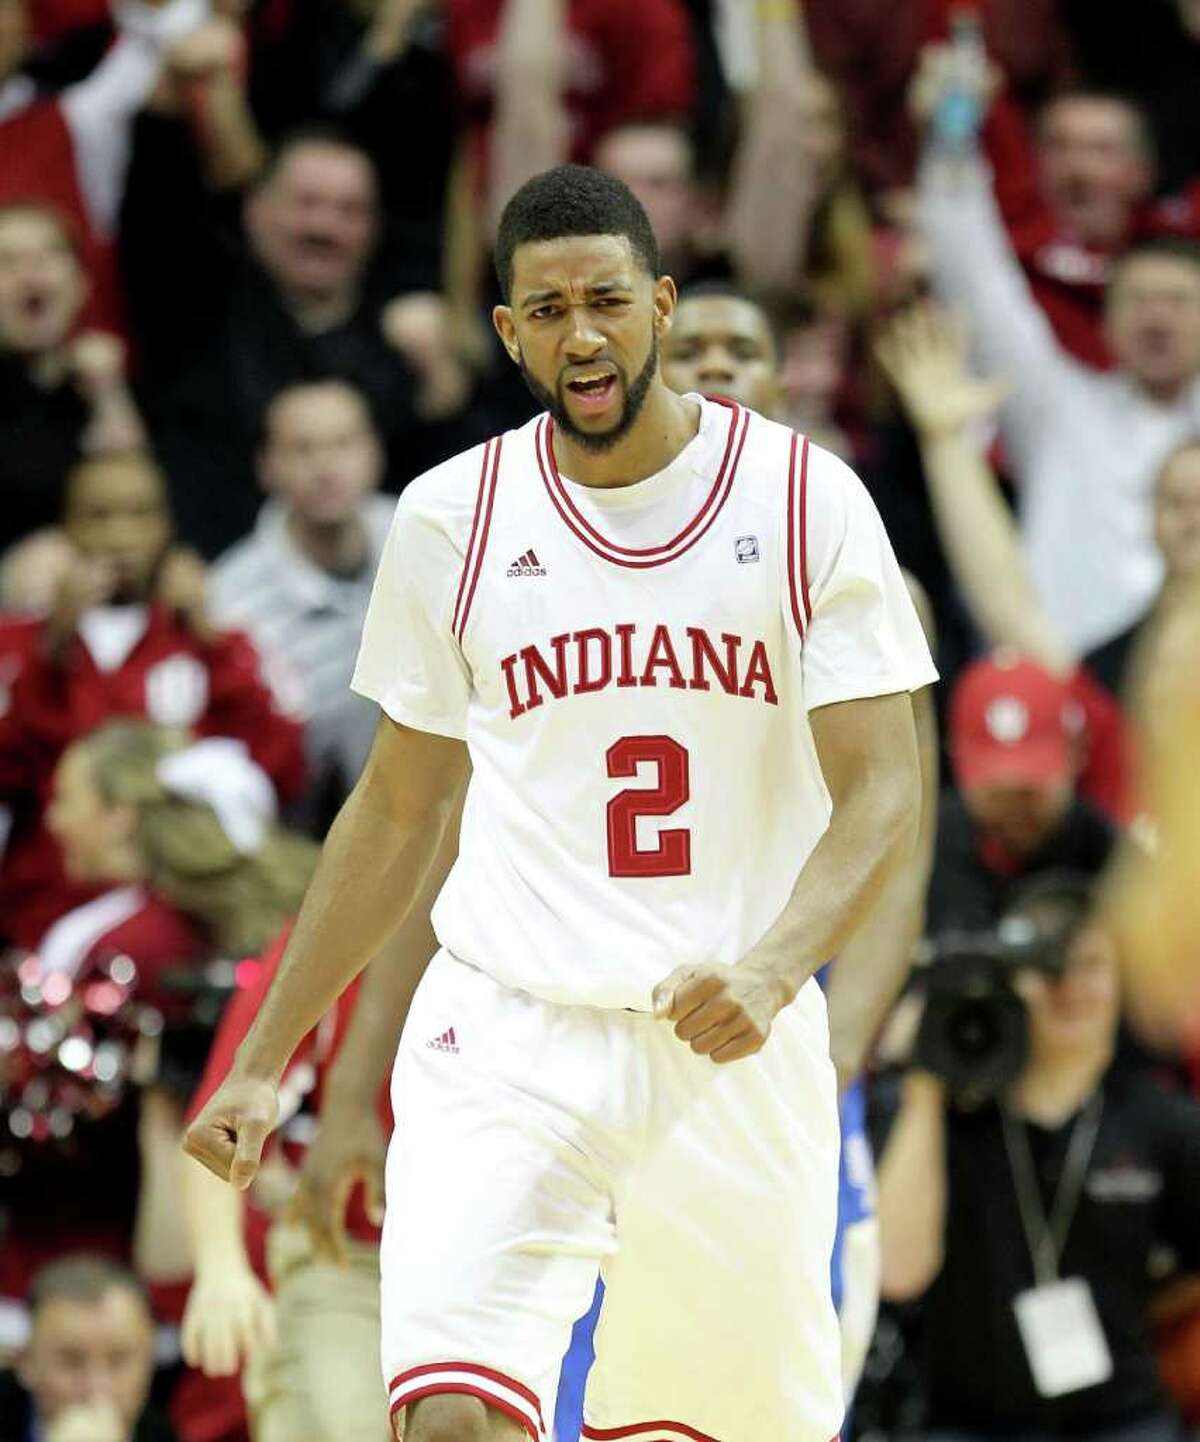 BLOOMINGTON, IN - DECEMBER 10: Christian Watford #2 of the Indiana Hoosiers celebrates during the Indiana 73-72 victory over the Kentucky Wildcats at Assembly Hall on December 10, 2011 in Bloomington, Indiana. (Photo by Andy Lyons/Getty Images)